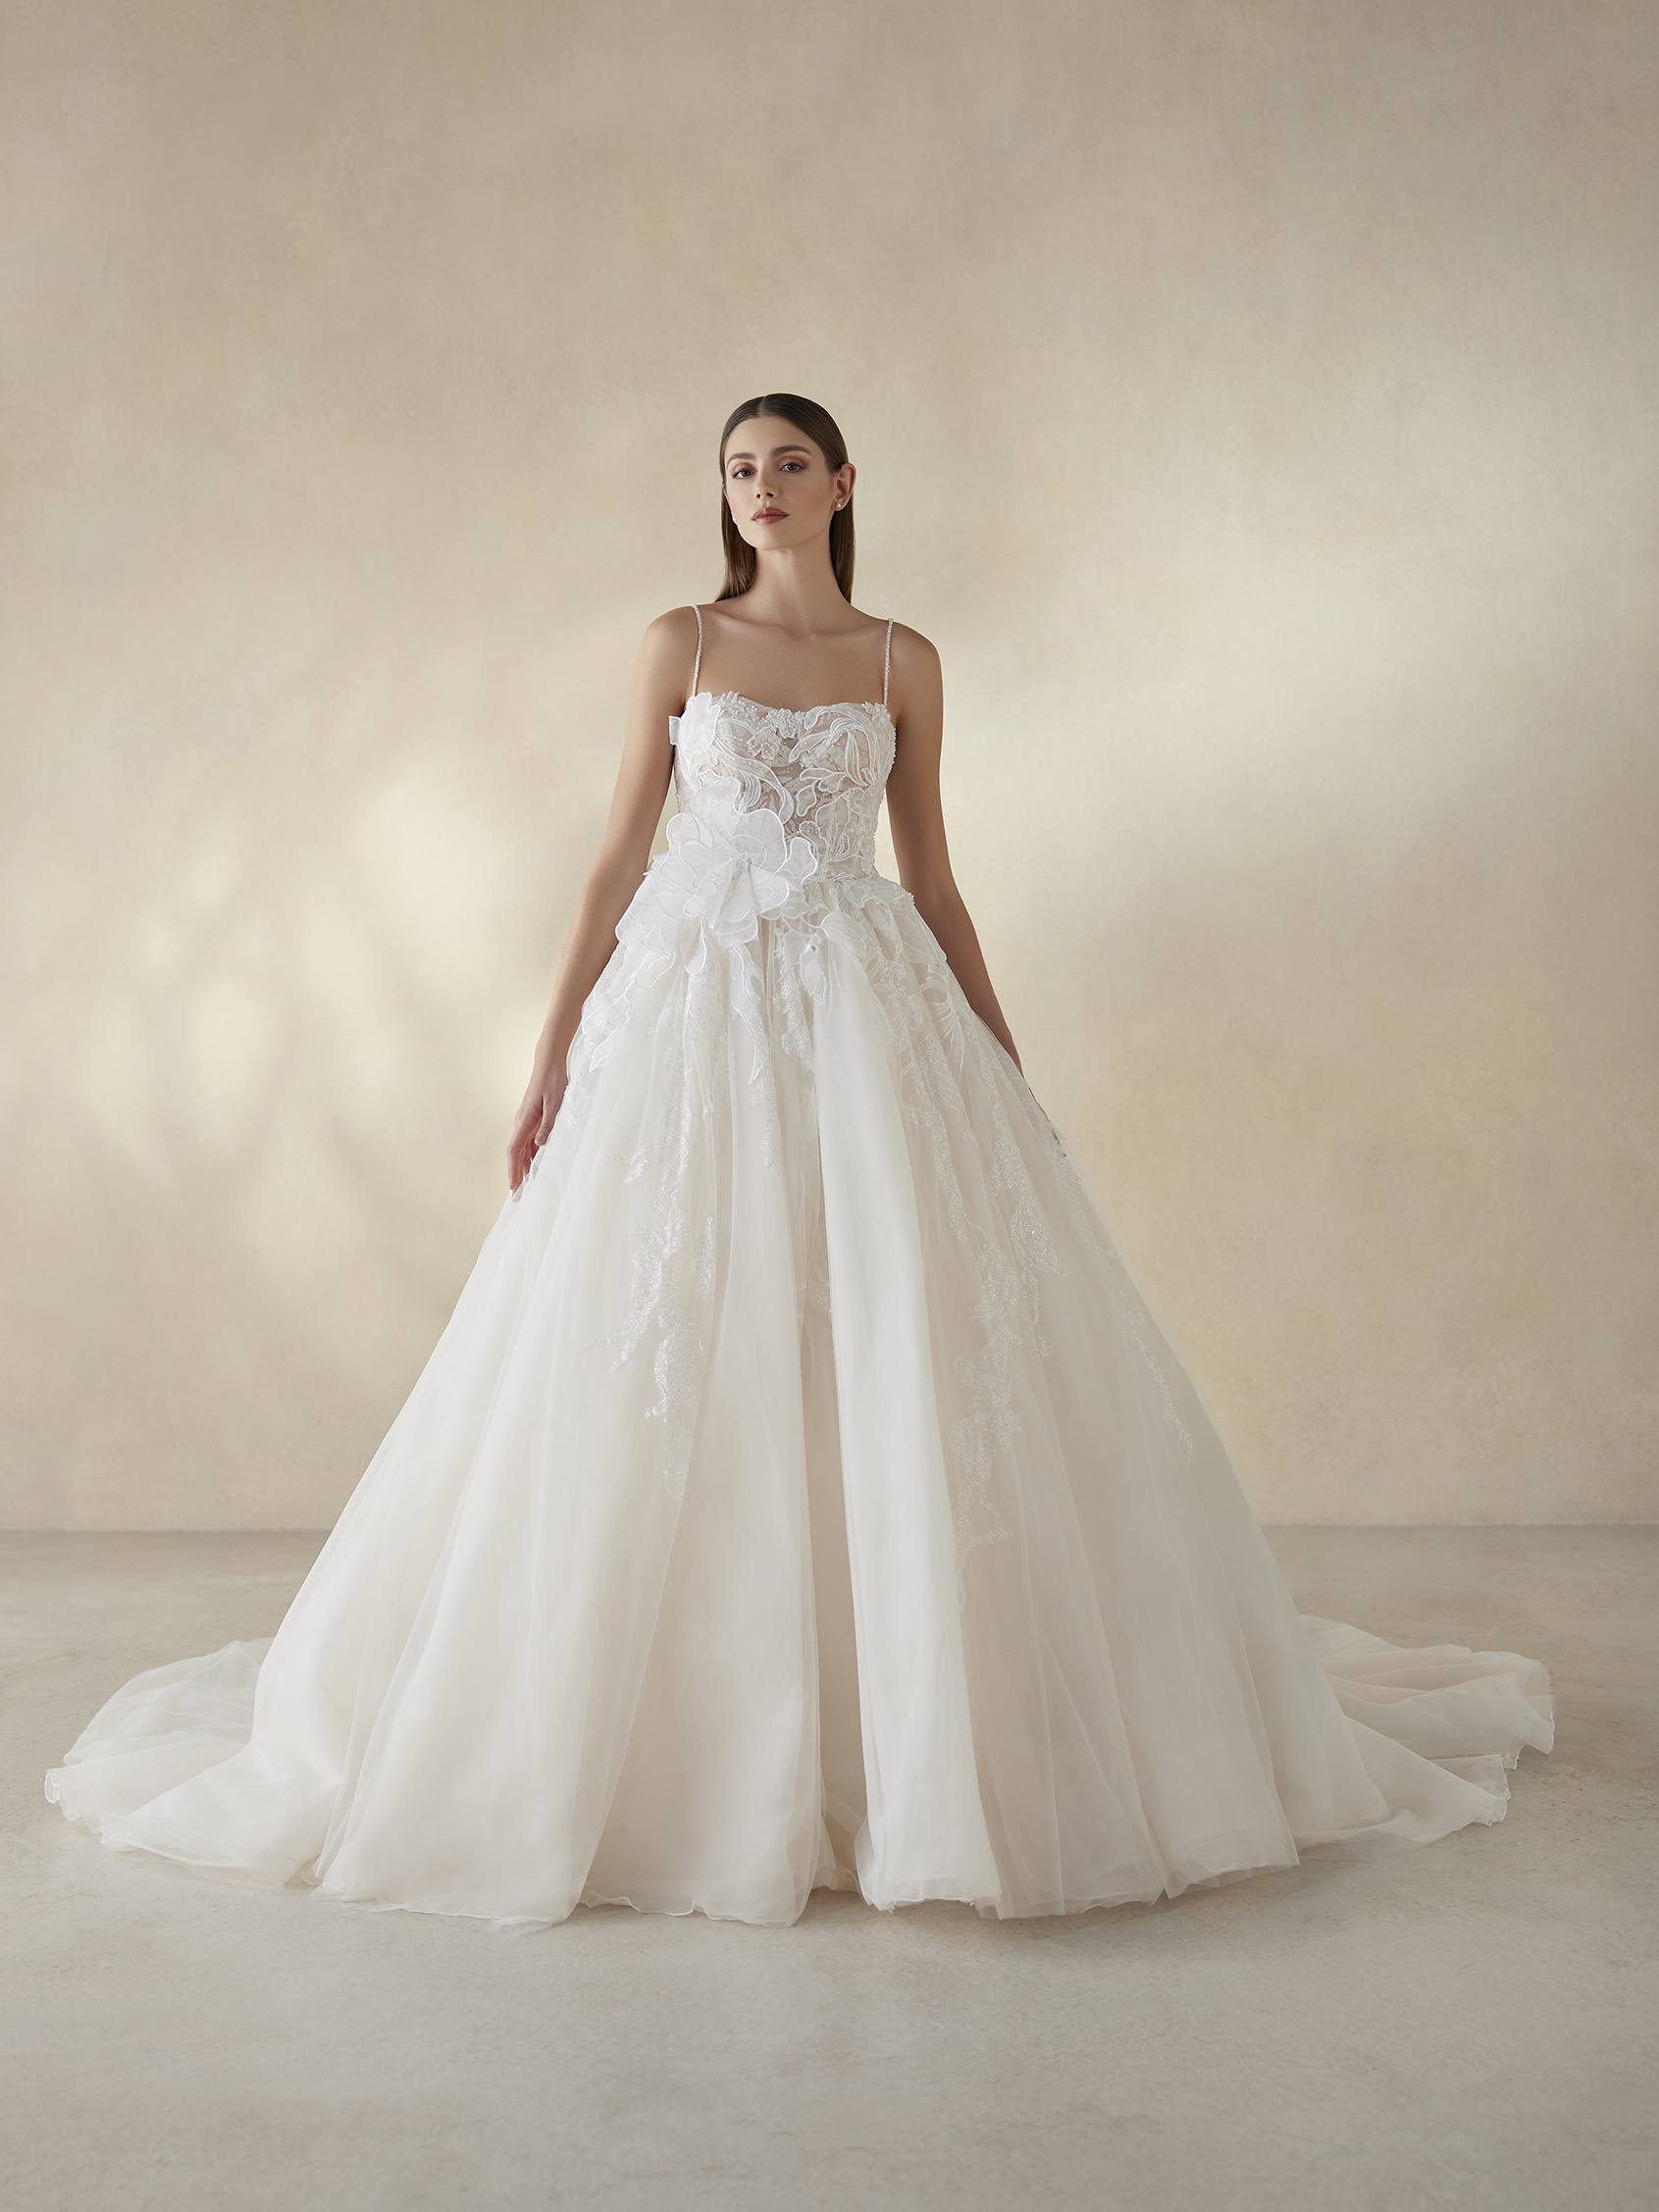 Ballgown Wedding Dresses - Timeless Bridal Couture